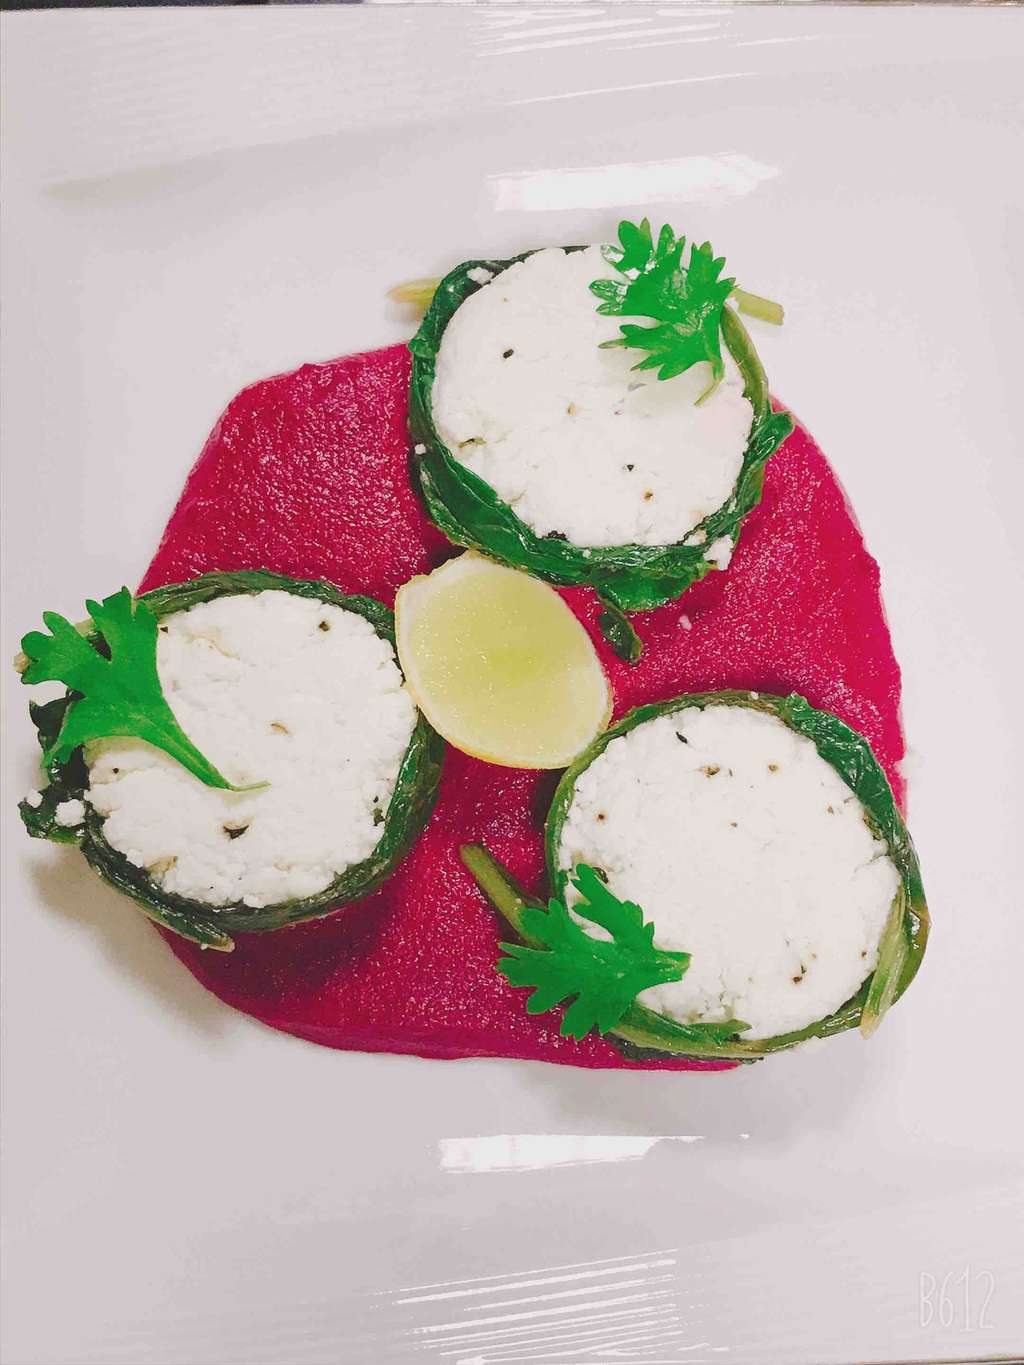 Cottage cheese stuff spinach roll, glazed in lemon and butter on beetroot makhni gray.